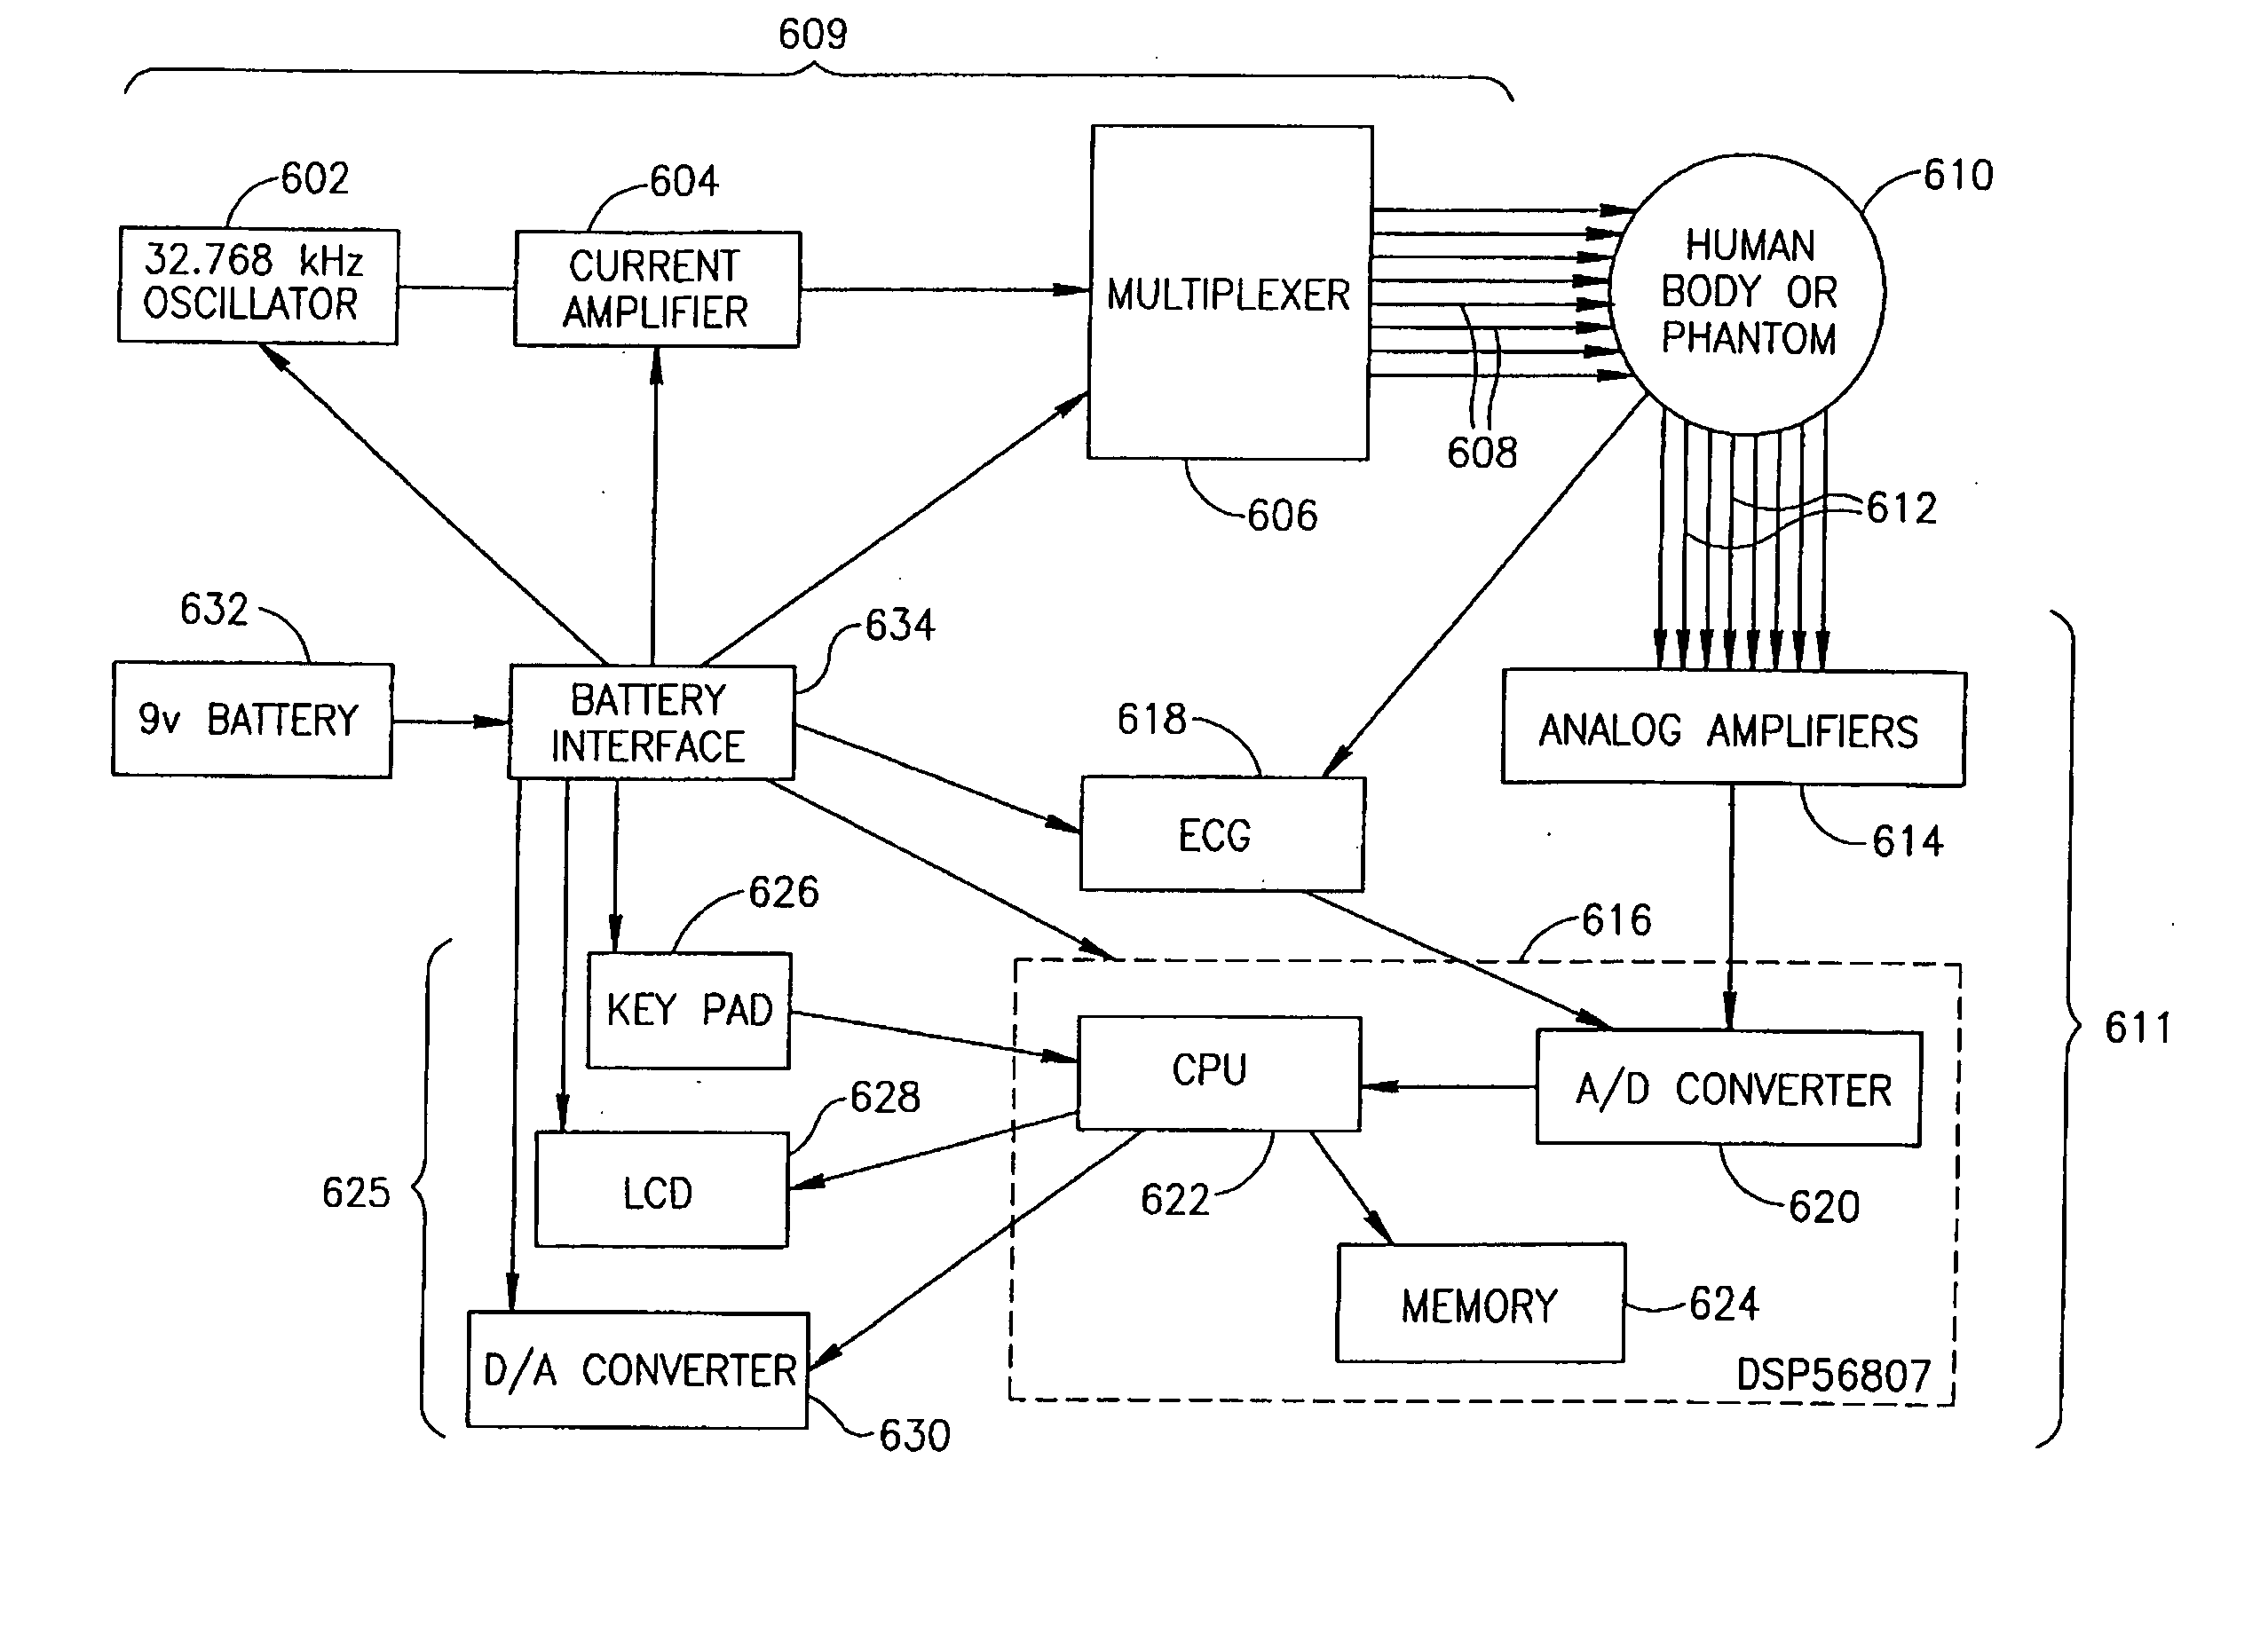 Apparatus for monitoring CHF patients using bio-impedance technique